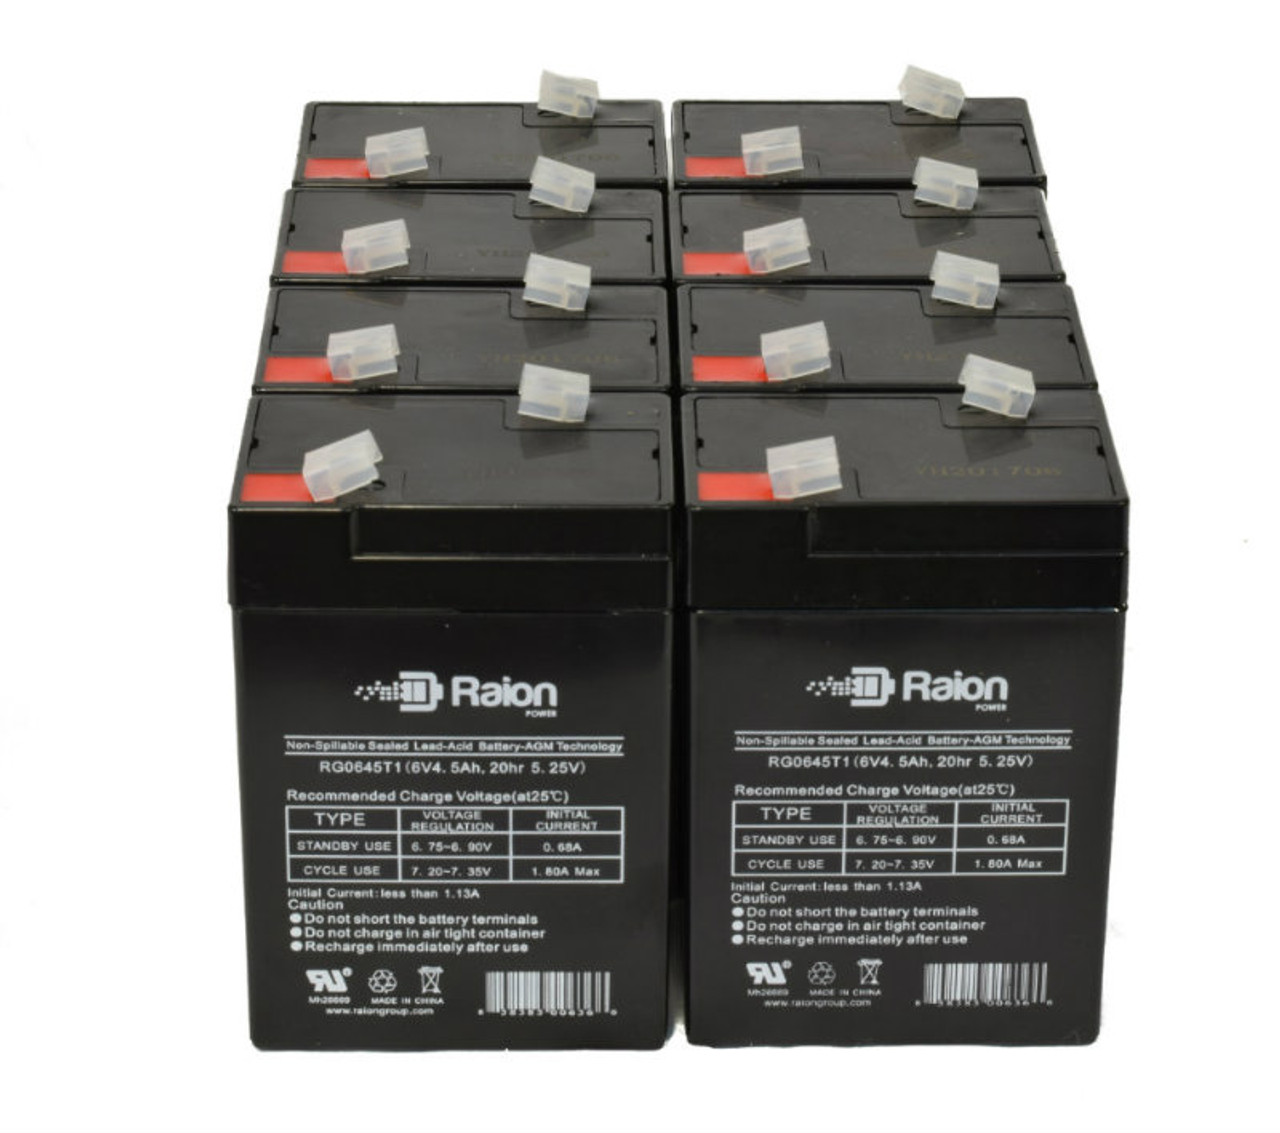 Raion Power 6V 4.5Ah Replacement Emergency Light Battery for Lithonia AQM EL - 8 Pack